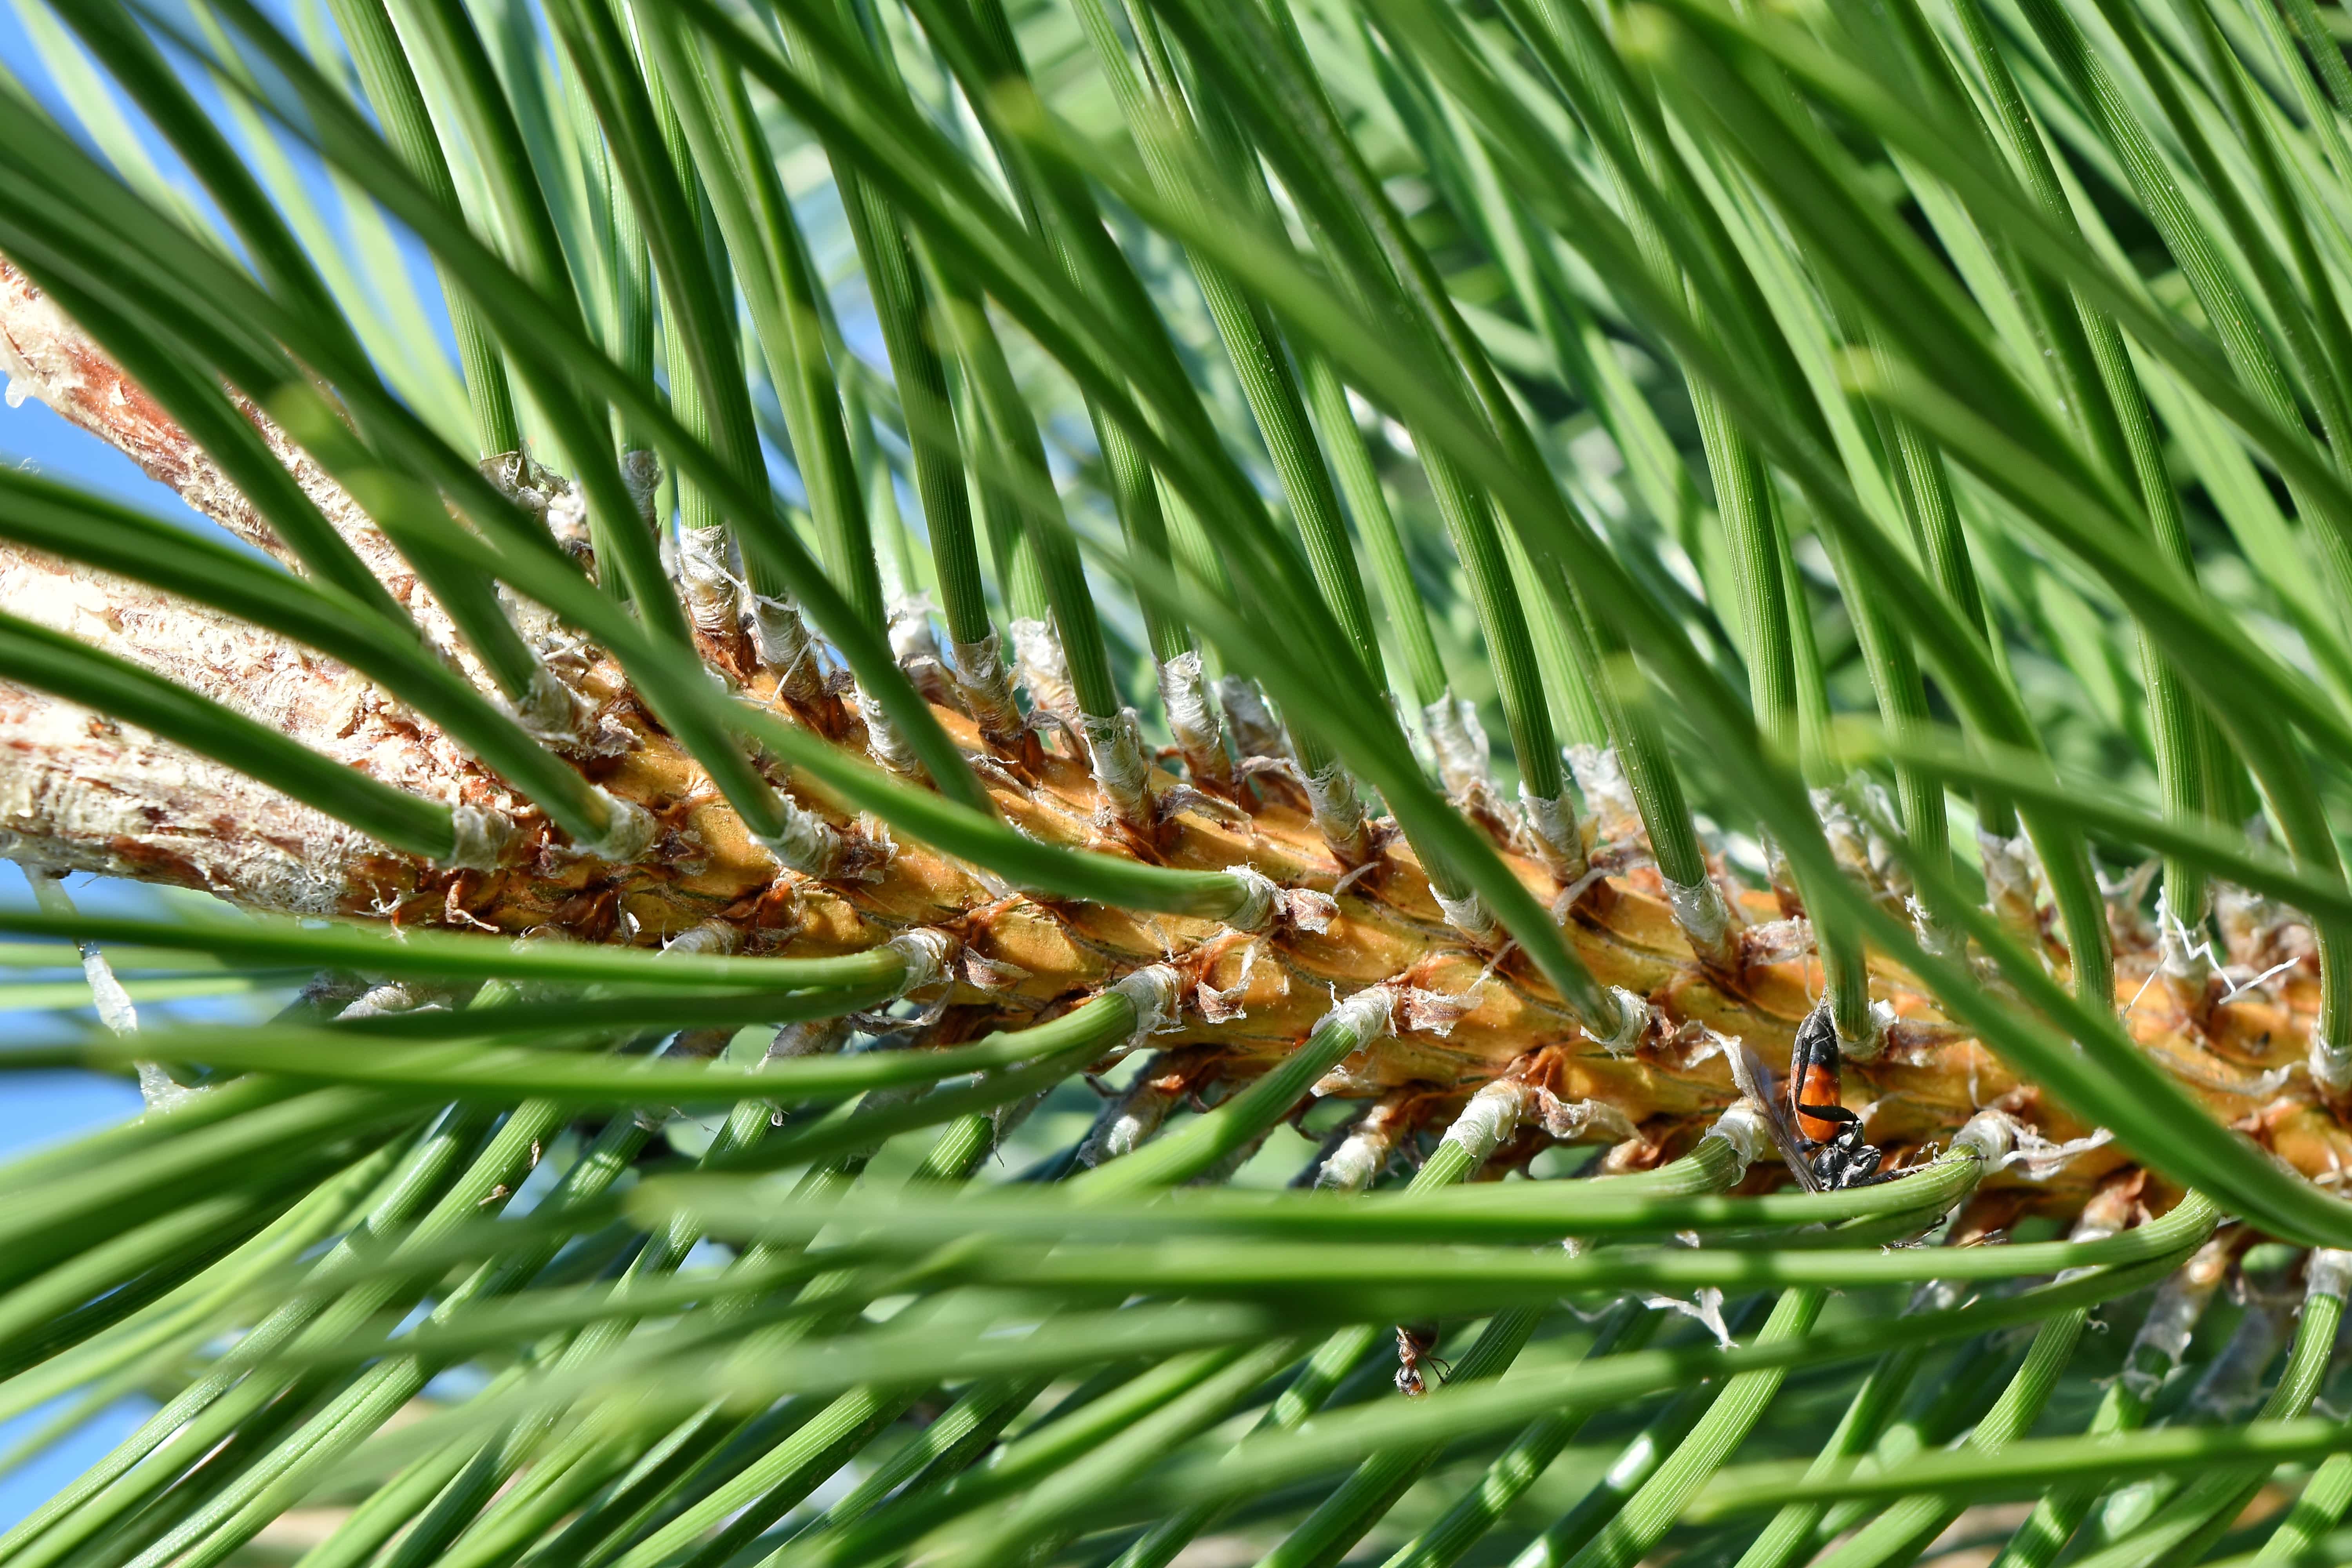 Free picture: close-up, conifers, evergreen, green leaves, plant, nature, tree, pine, outdoors, leaf